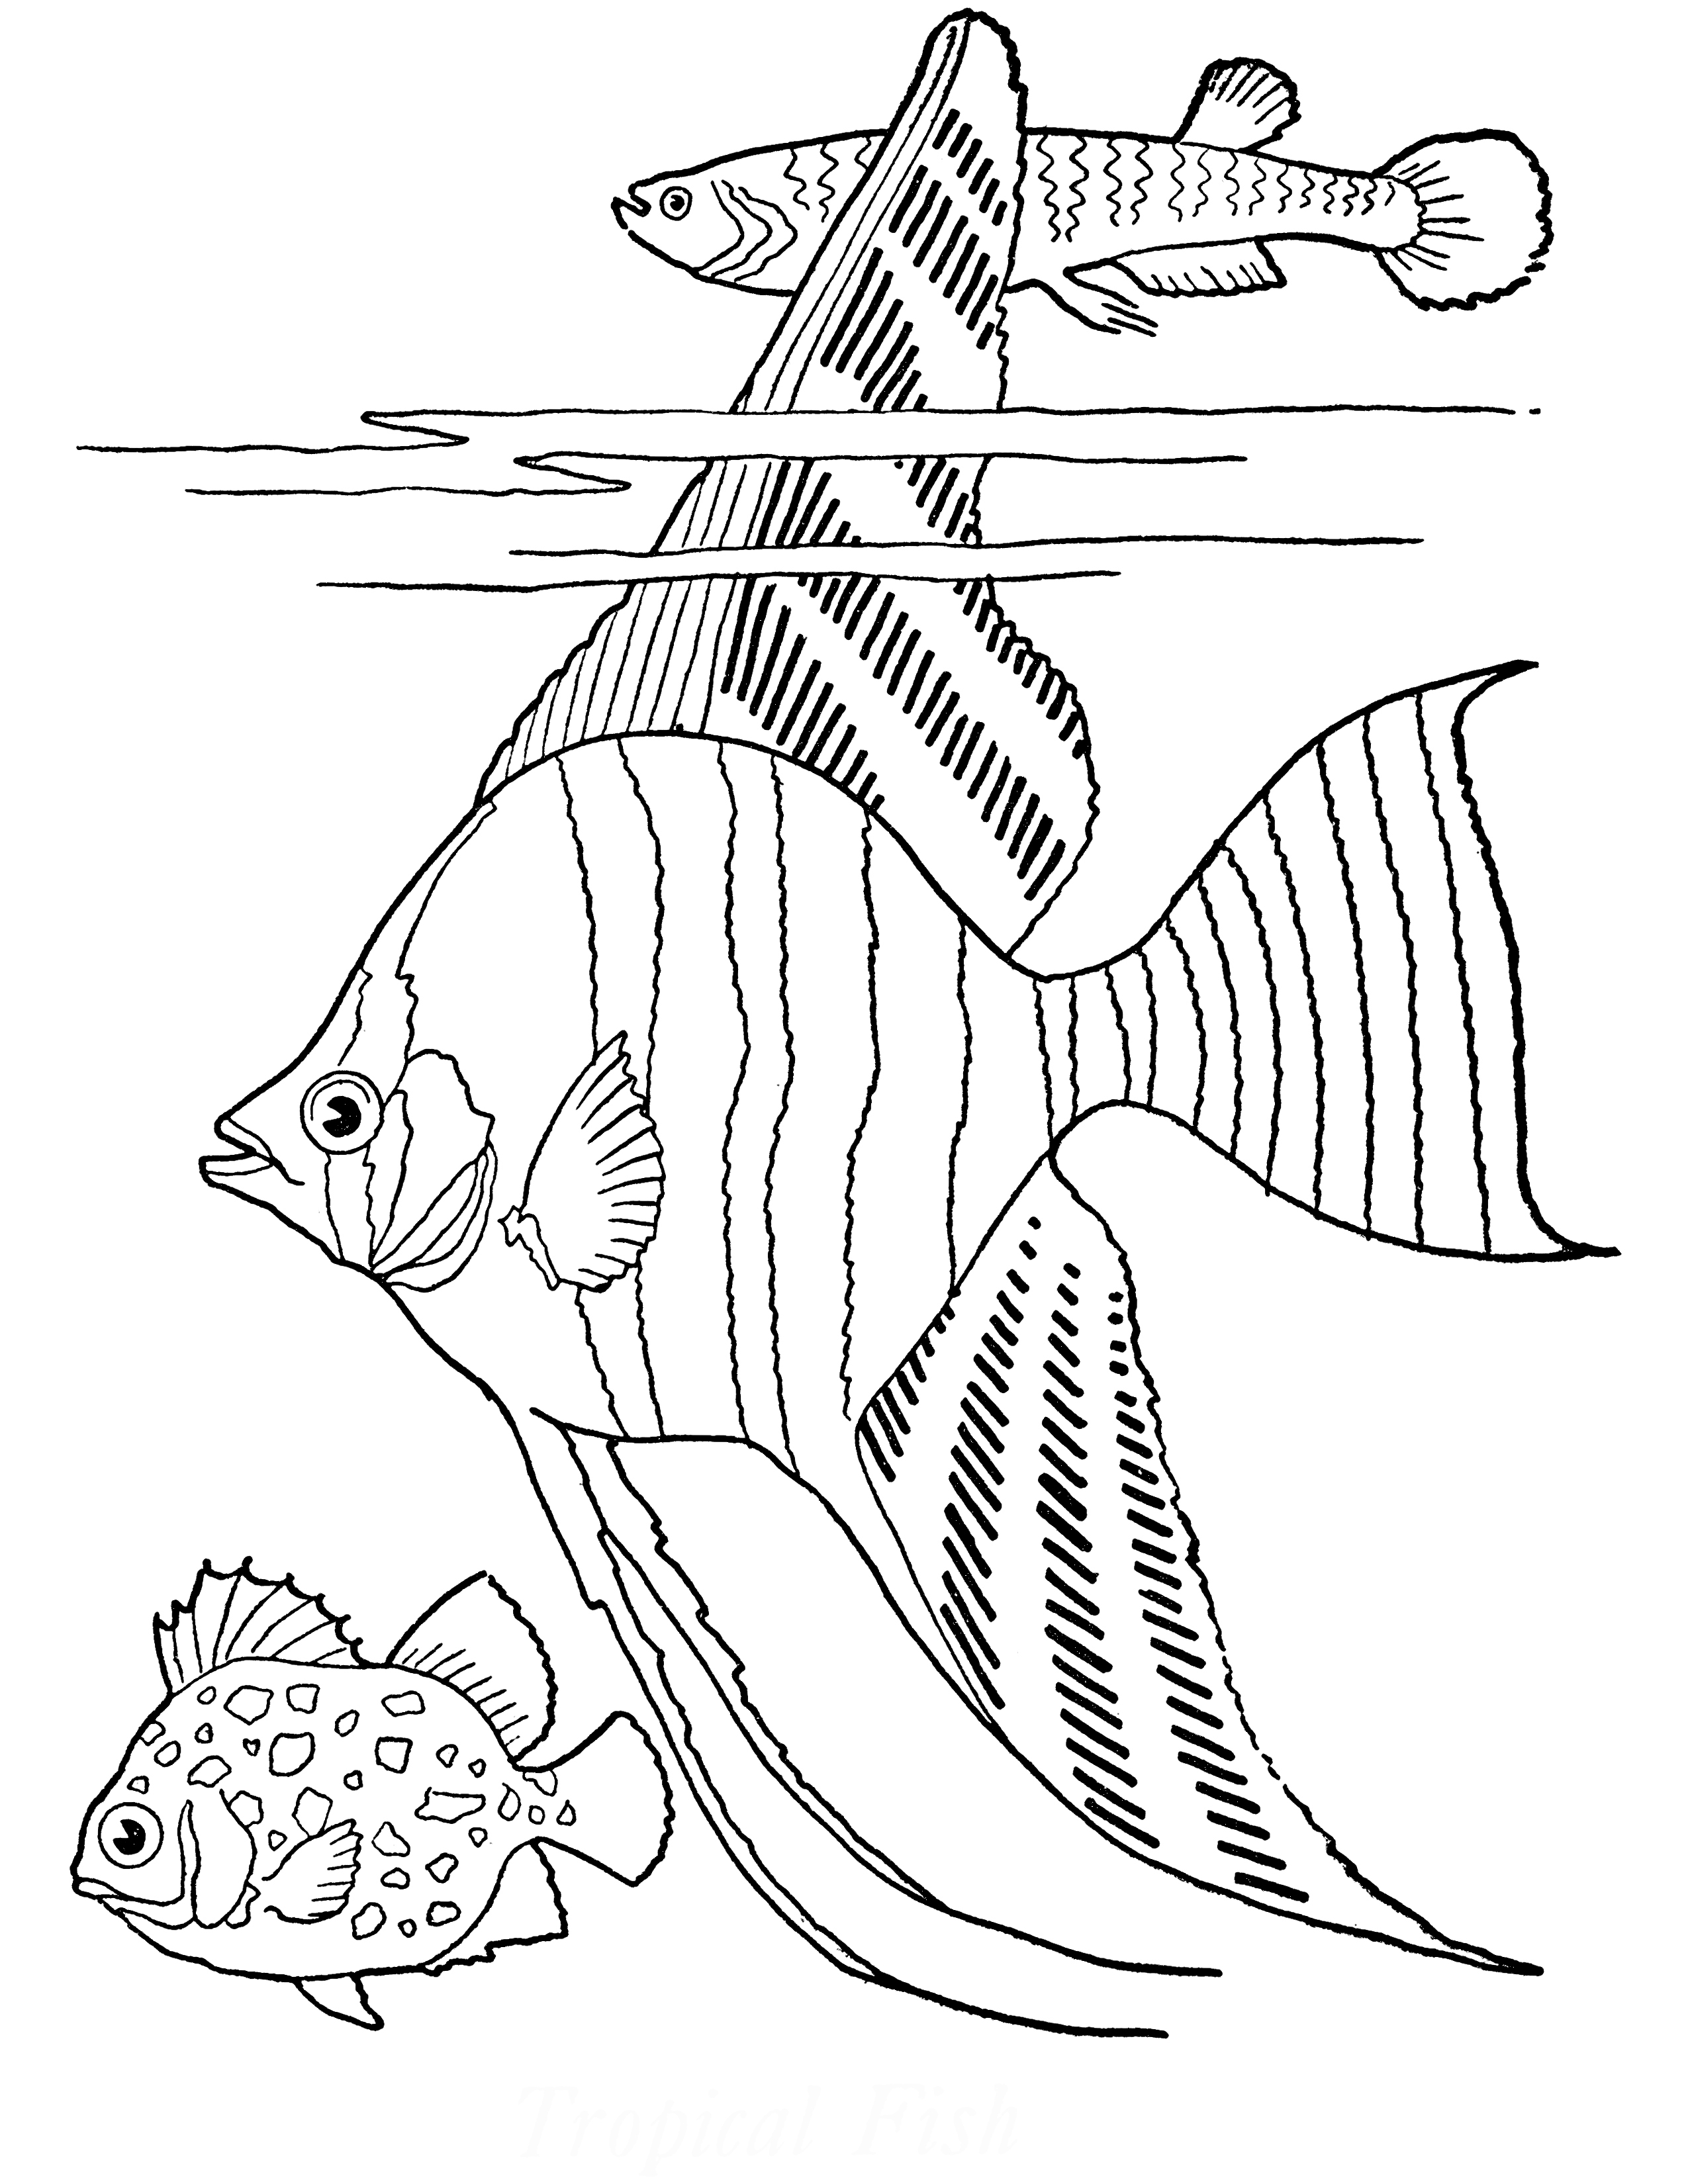 Free Printable Adult Coloring Page   Tropical Fish   The Graphics Fairy